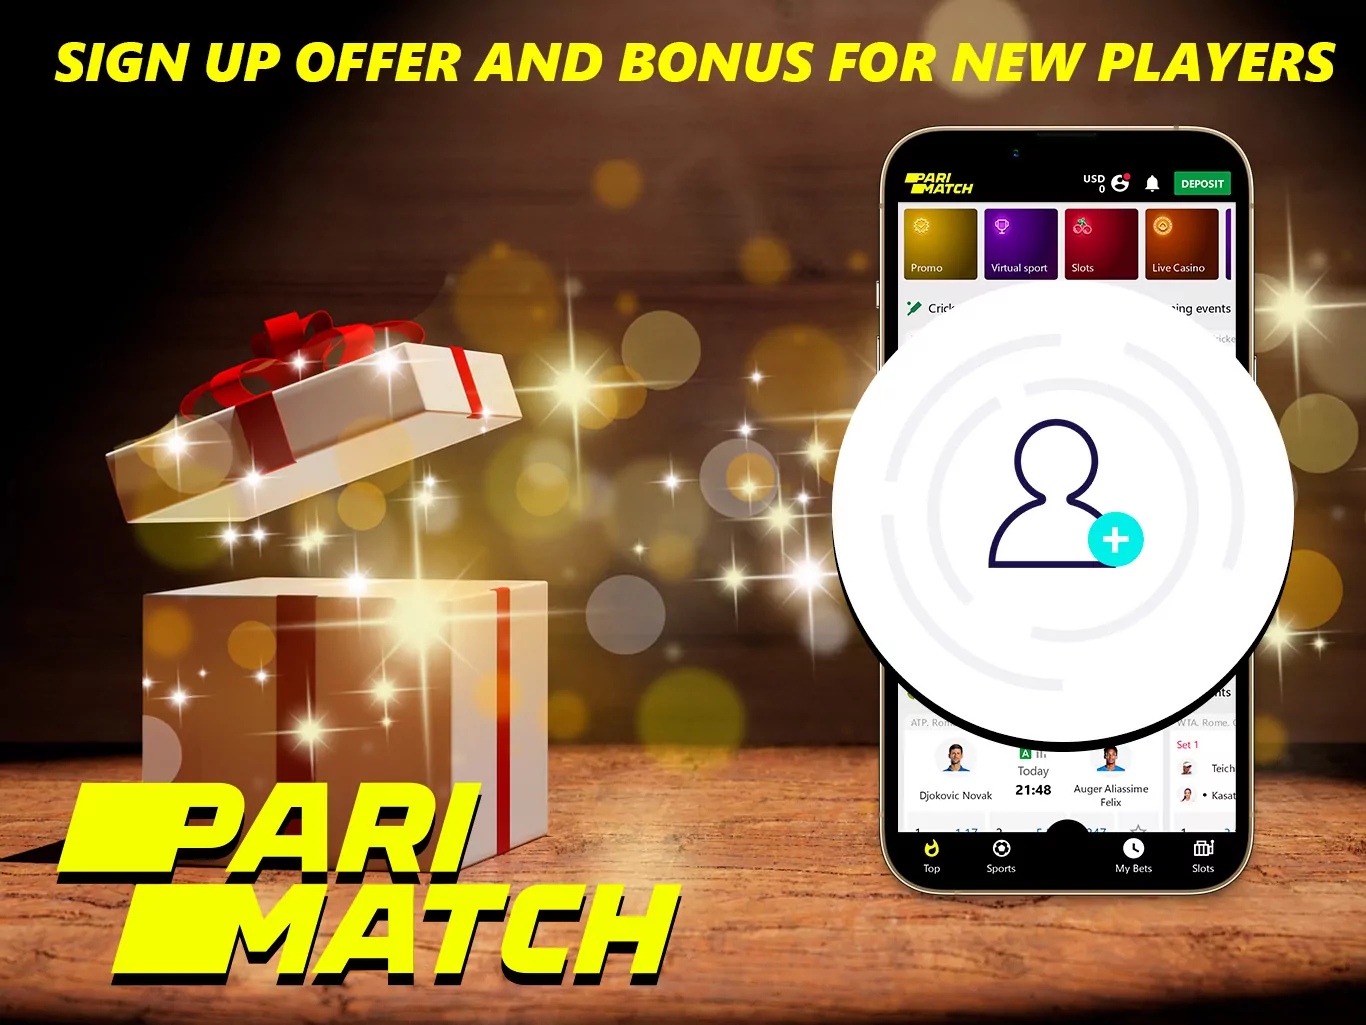 Everyone who registers receives a welcome bonus at Parimatch.